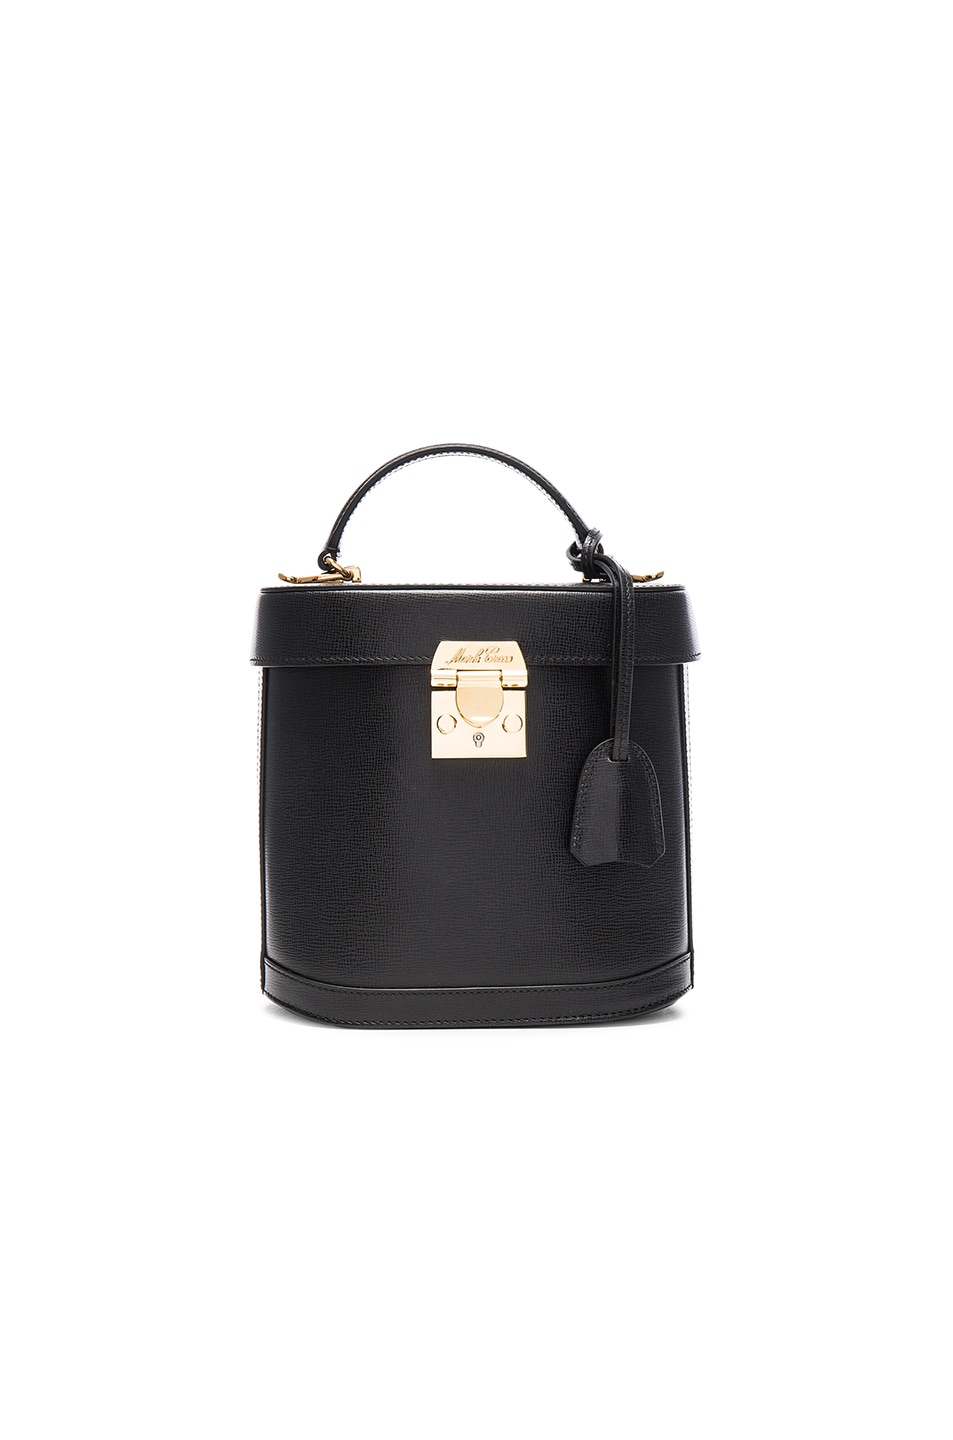 Image 1 of Mark Cross Saffiano Benchley Bag in Black